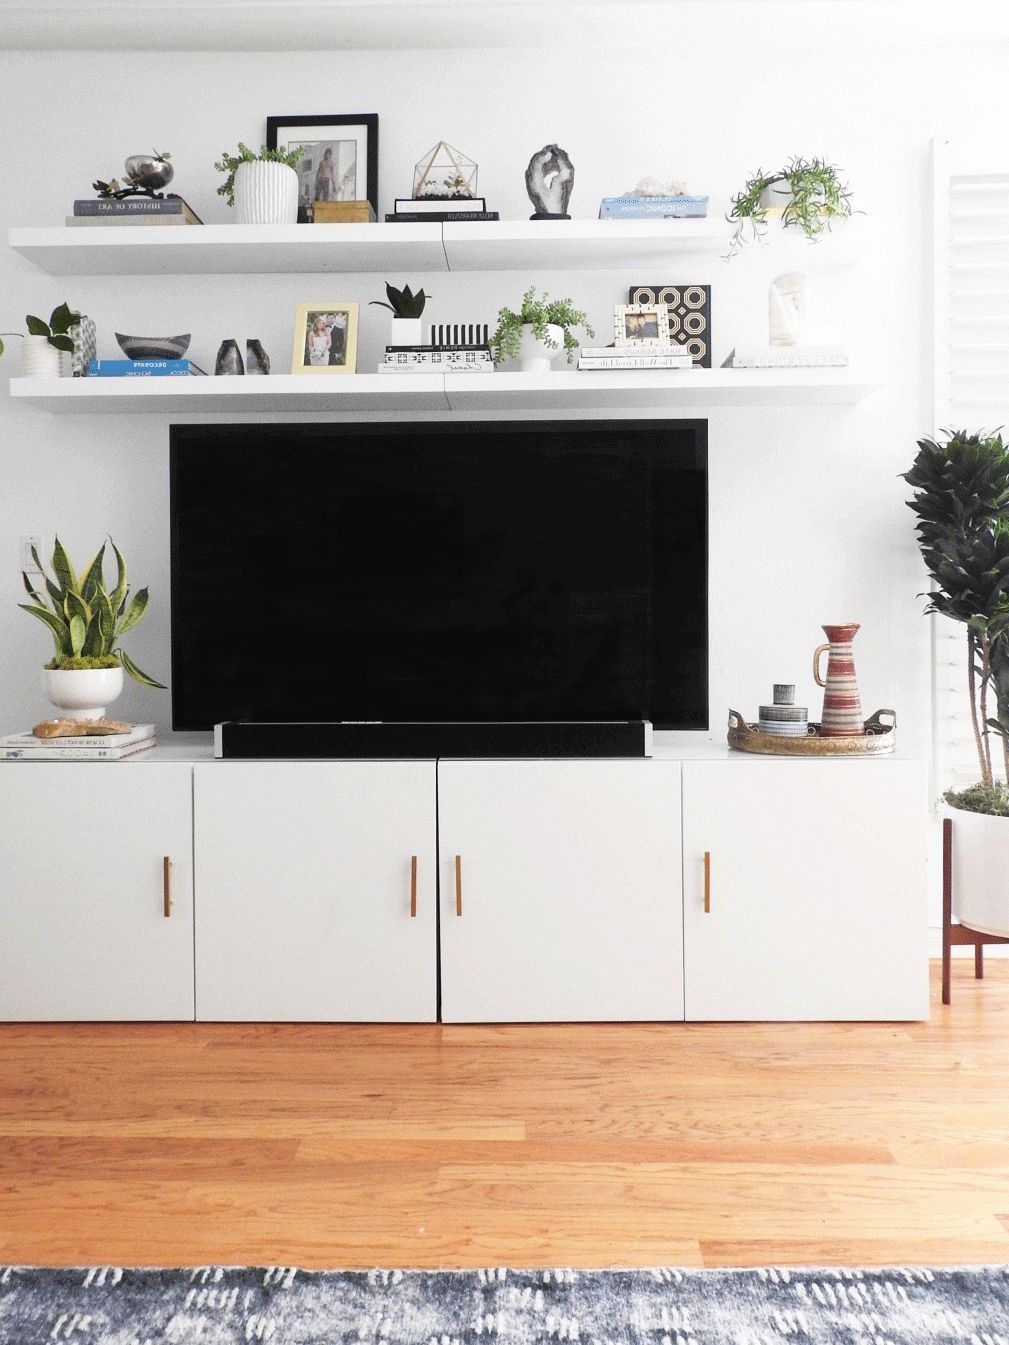 Ikea Besta Tv Stand Hack With Two Lack Shelves Above | Natasha With Willa 80 Inch Tv Stands (View 15 of 20)